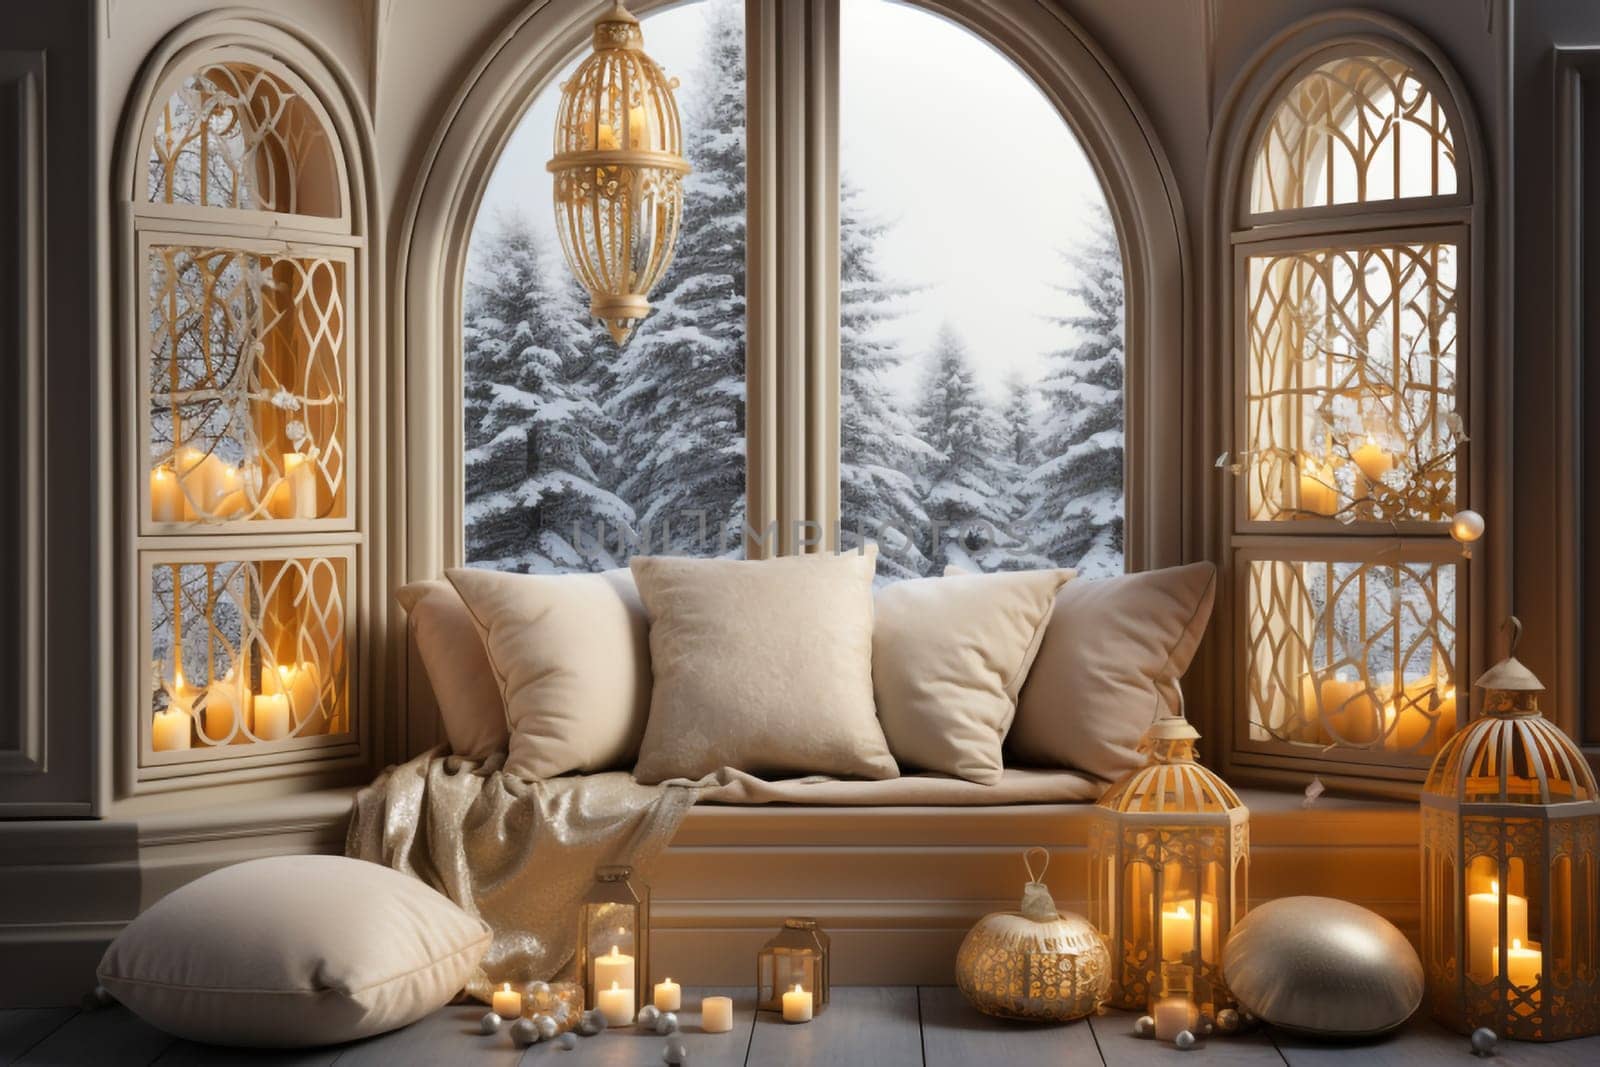 Illuminated room with a large window decorated for Christmas by Ciorba